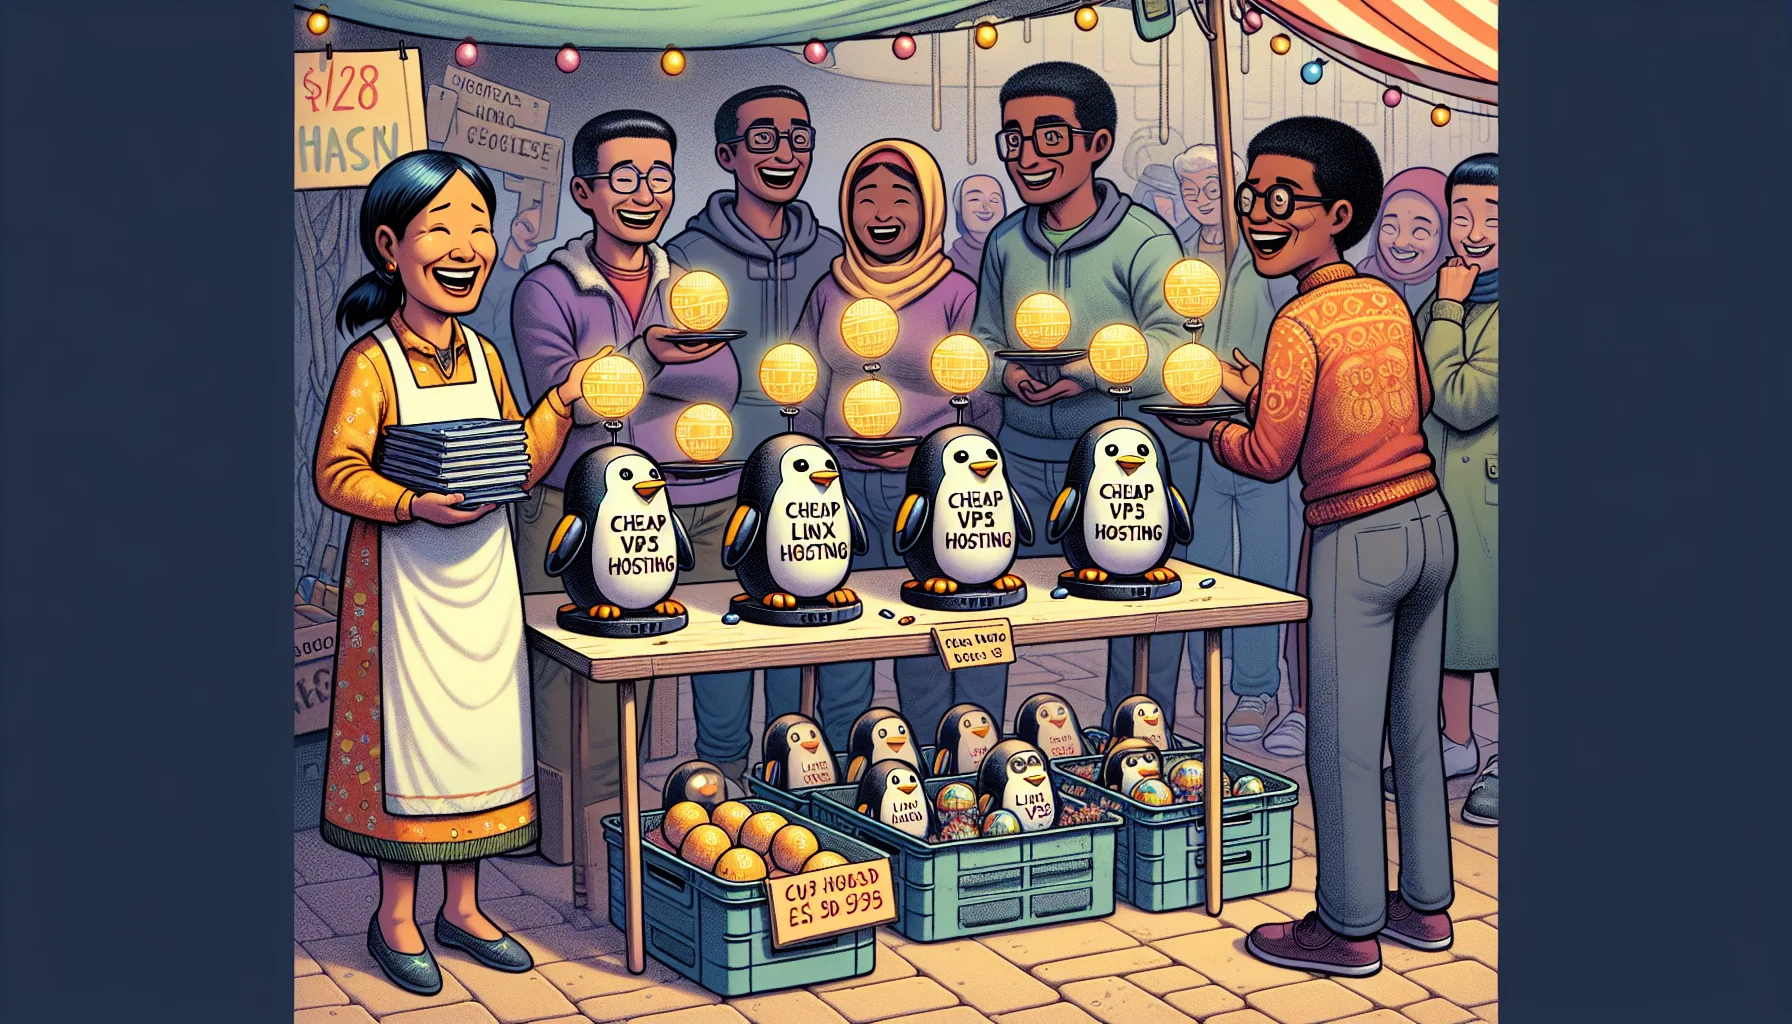 Imagine a humorous scene depicting a flea market where digital items are being sold. At one stall, a cheerful vendor, a middle-aged East Asian woman, is exhibiting small, whimsical robot penguins, each with a sign proclaiming 'Cheap Linux VPS Hosting'. The penguins, as if on cue, are demonstrating their efficiency by juggling multiple spheres, each sphere luminous and etched with the symbol of a website. A variety of potential customers, including a young Black male in tech gear and a South Asian woman with a stack of coding books, are laughing and showing visible interest, intrigued by this unique method of web hosting promotion.